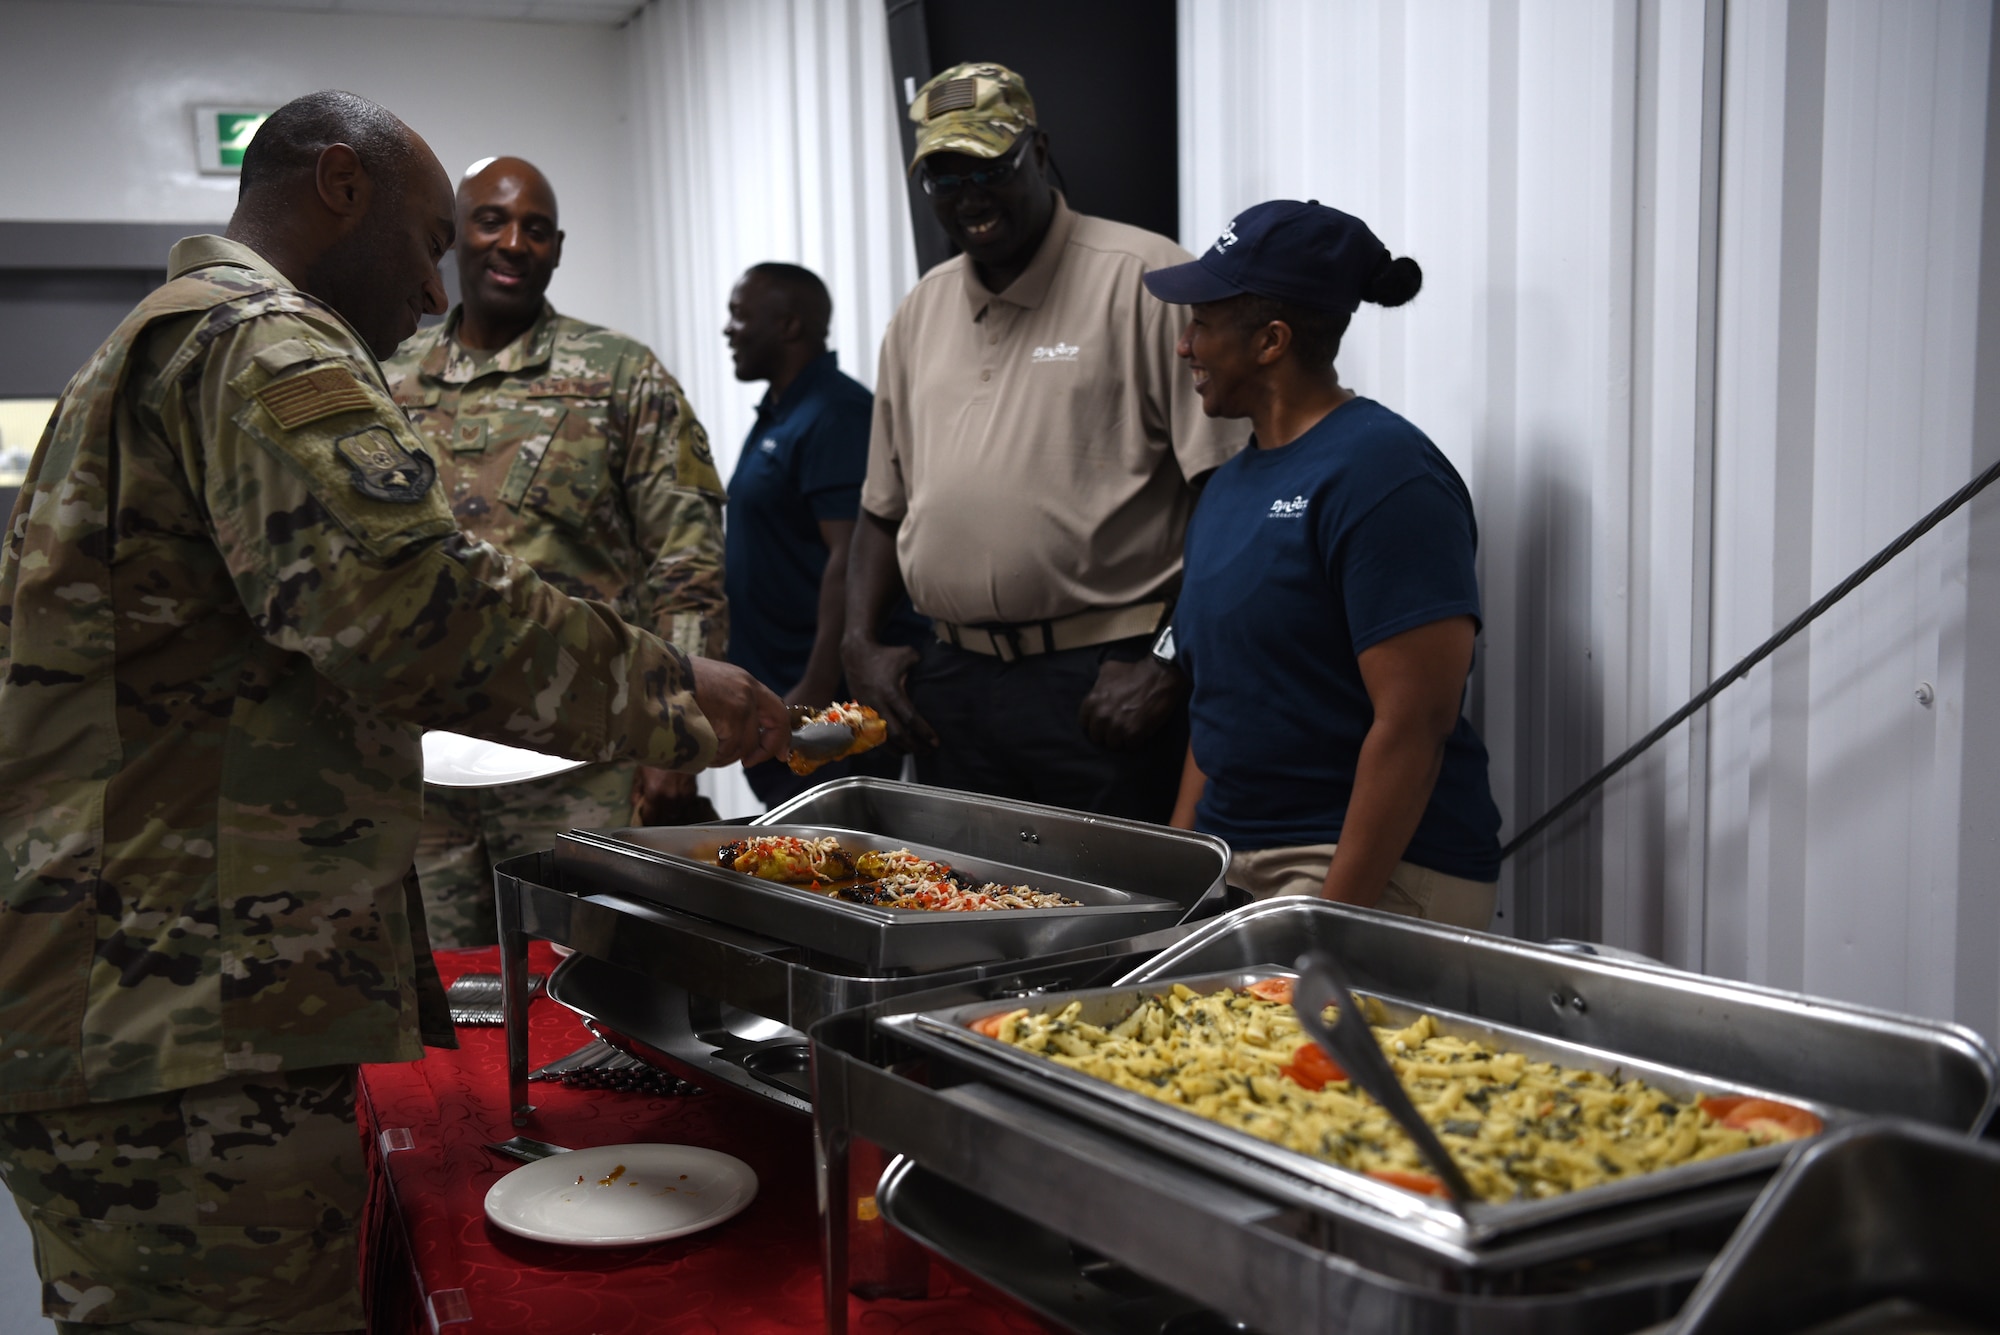 The 380th Expeditionary Force Support Squadron provides a taste testing of new vegetarian options during a Food Forum at the Oasis dining facility April 16, 2019, at Al Dhafra Air Base, United Arab Emirates.